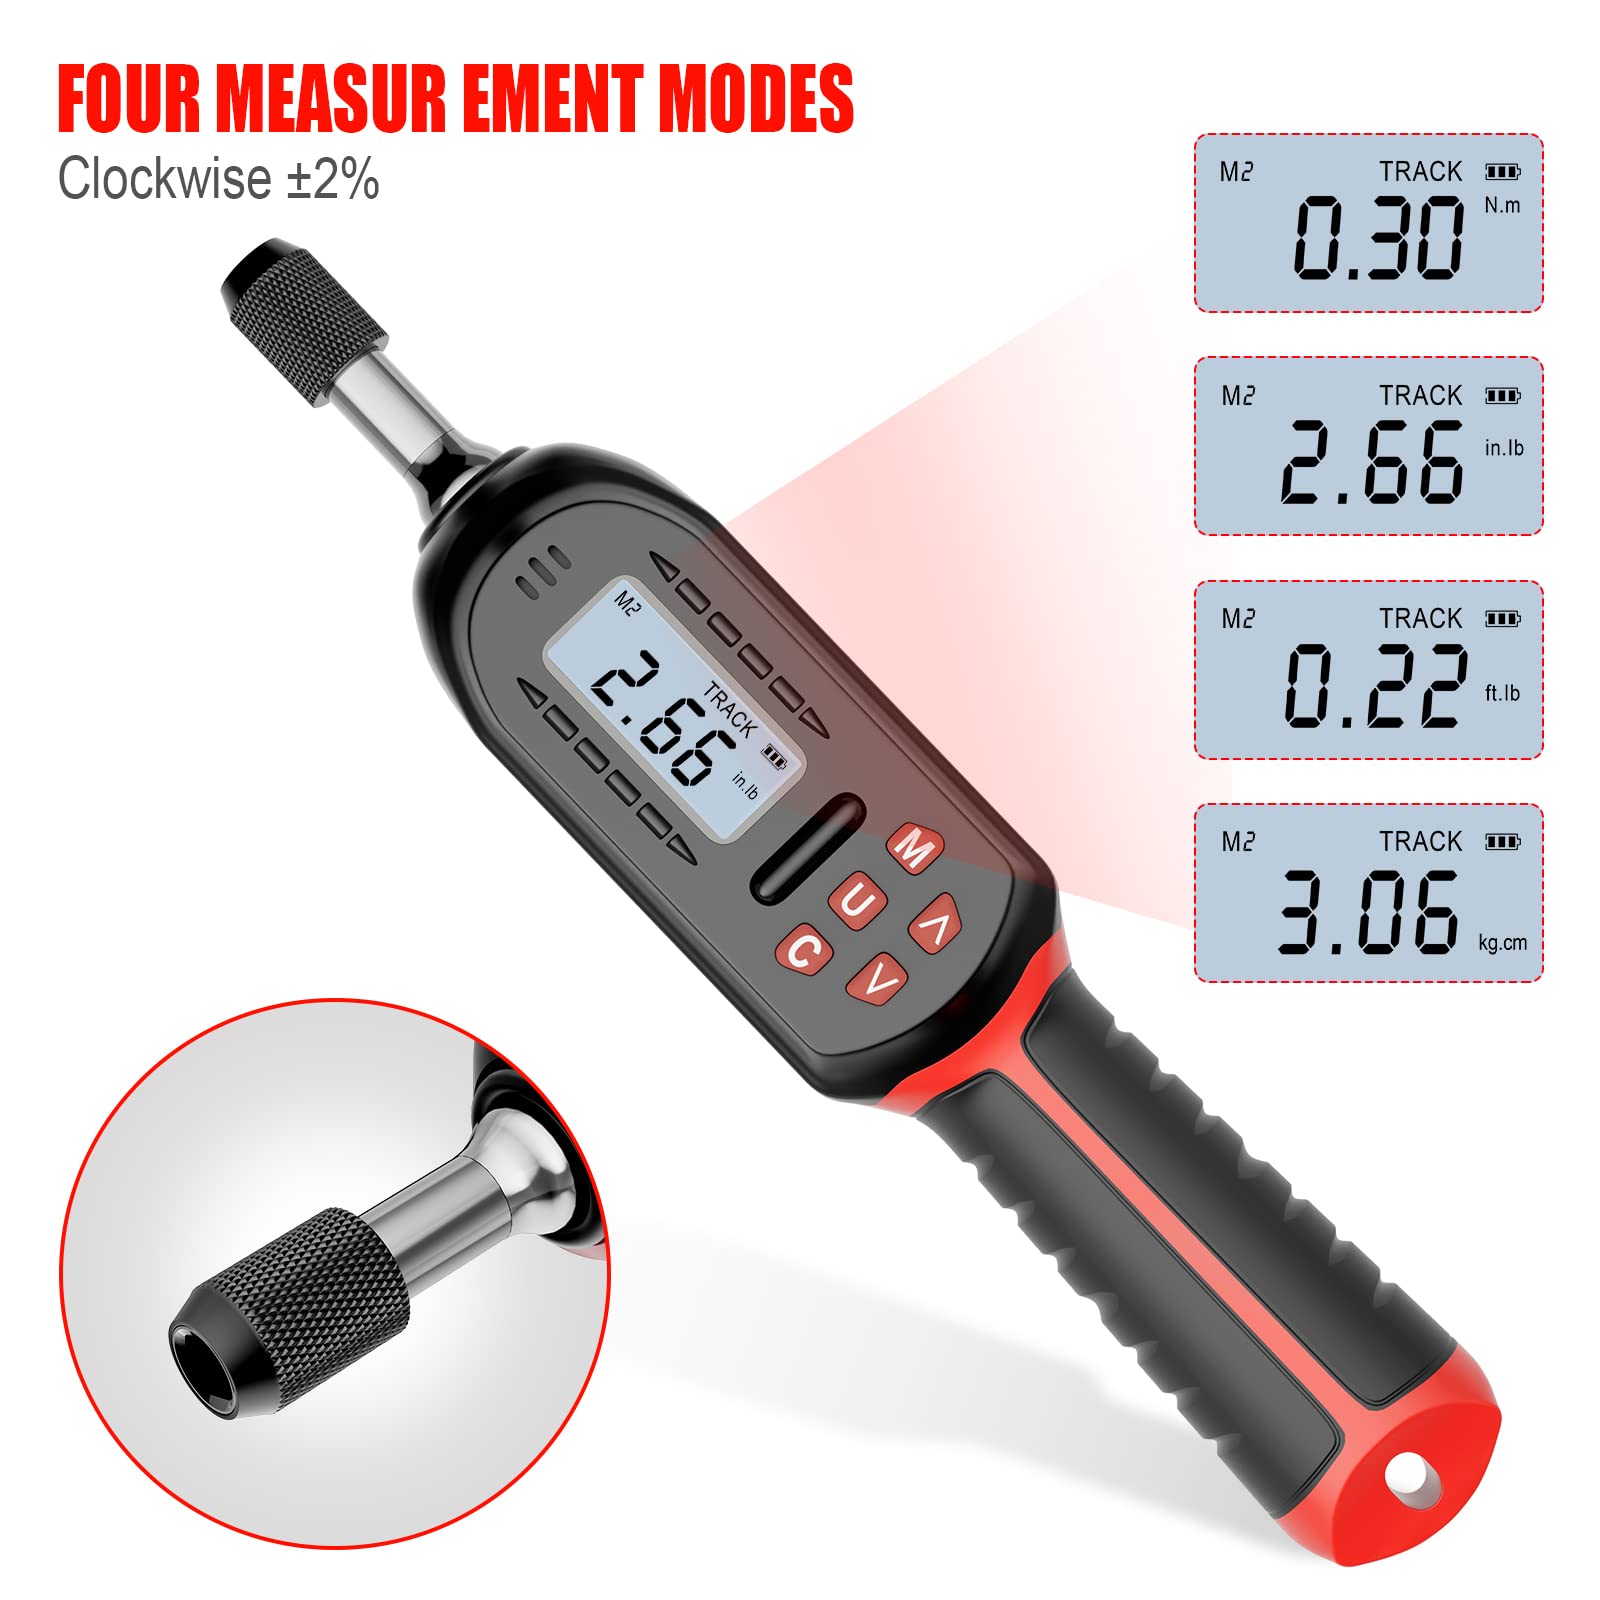 VANPO Digital Torque Screwdriver 2.66-53.1 in-lbs/0.3-6 Nm, Adjustable Screwdriver Torque Wrench Set with Buzzer/LED Indicator Notification for Bike Repairing, Tools, Maintenance and Mounting